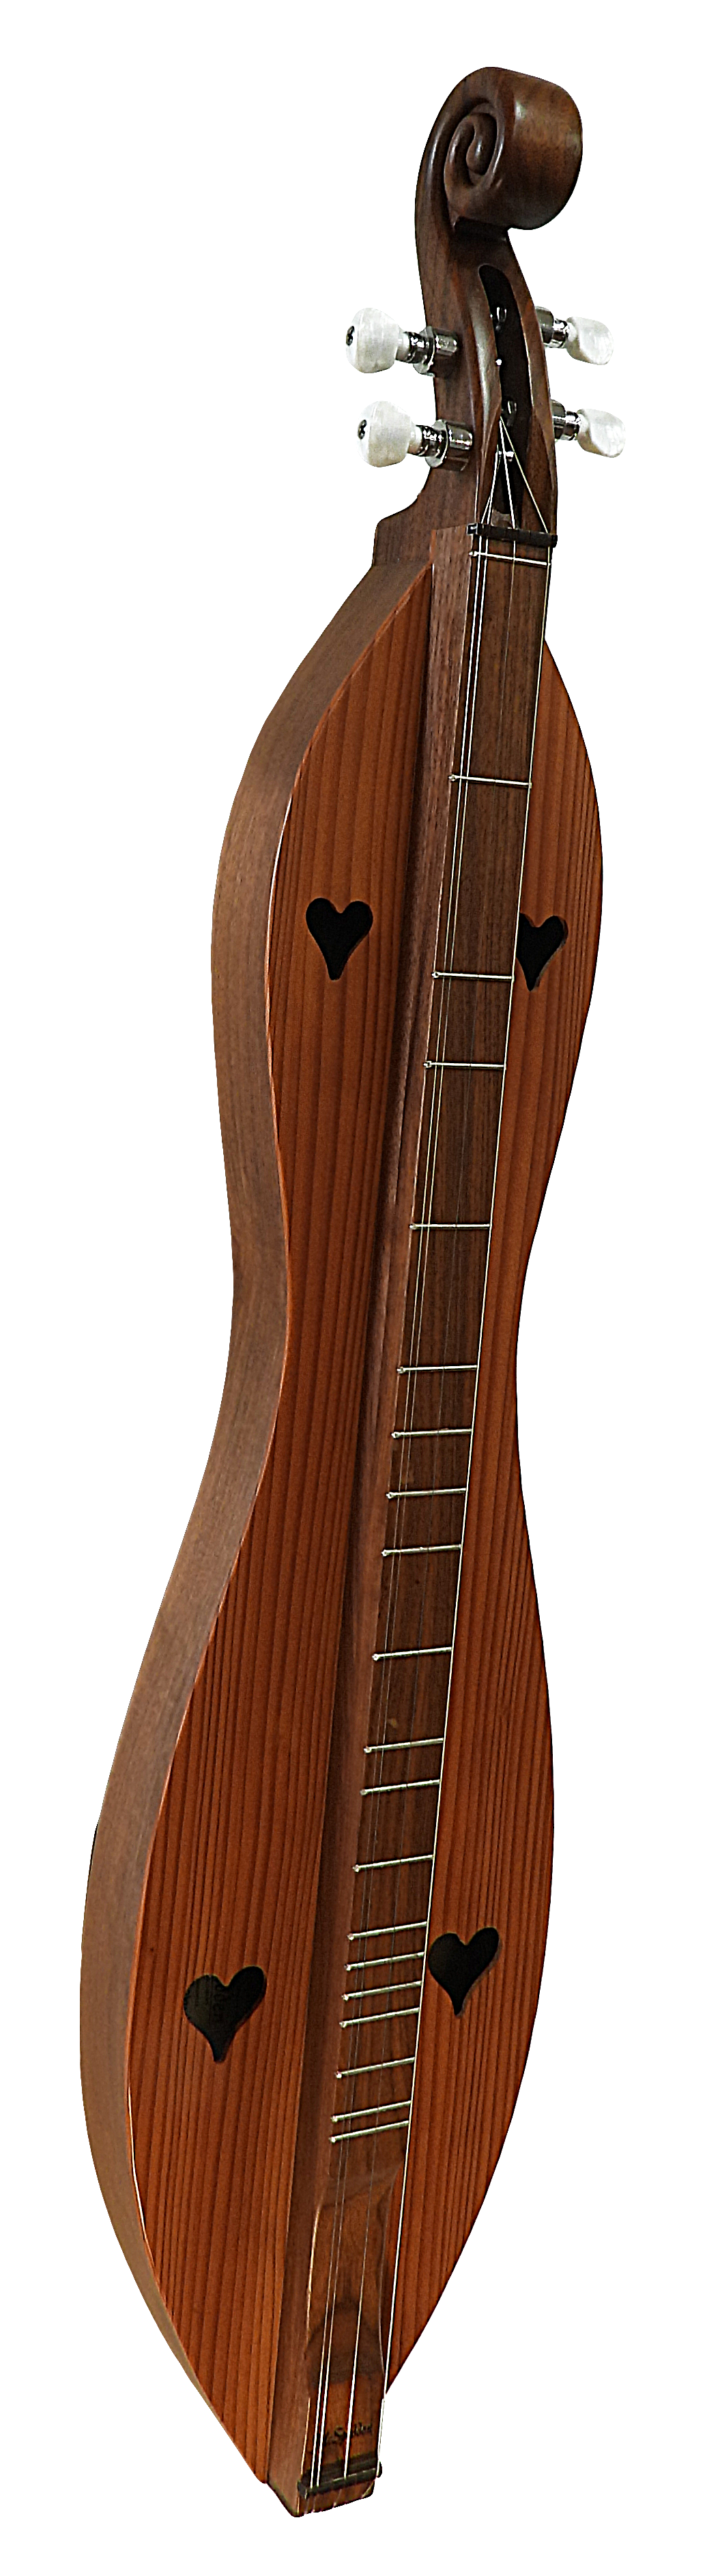 A 4 String, Scroll head, Hourglass with Walnut back and sides, Redwood top (4SHWR) dulcimer with a wooden neck, accompanied by a padded navy nylon case.